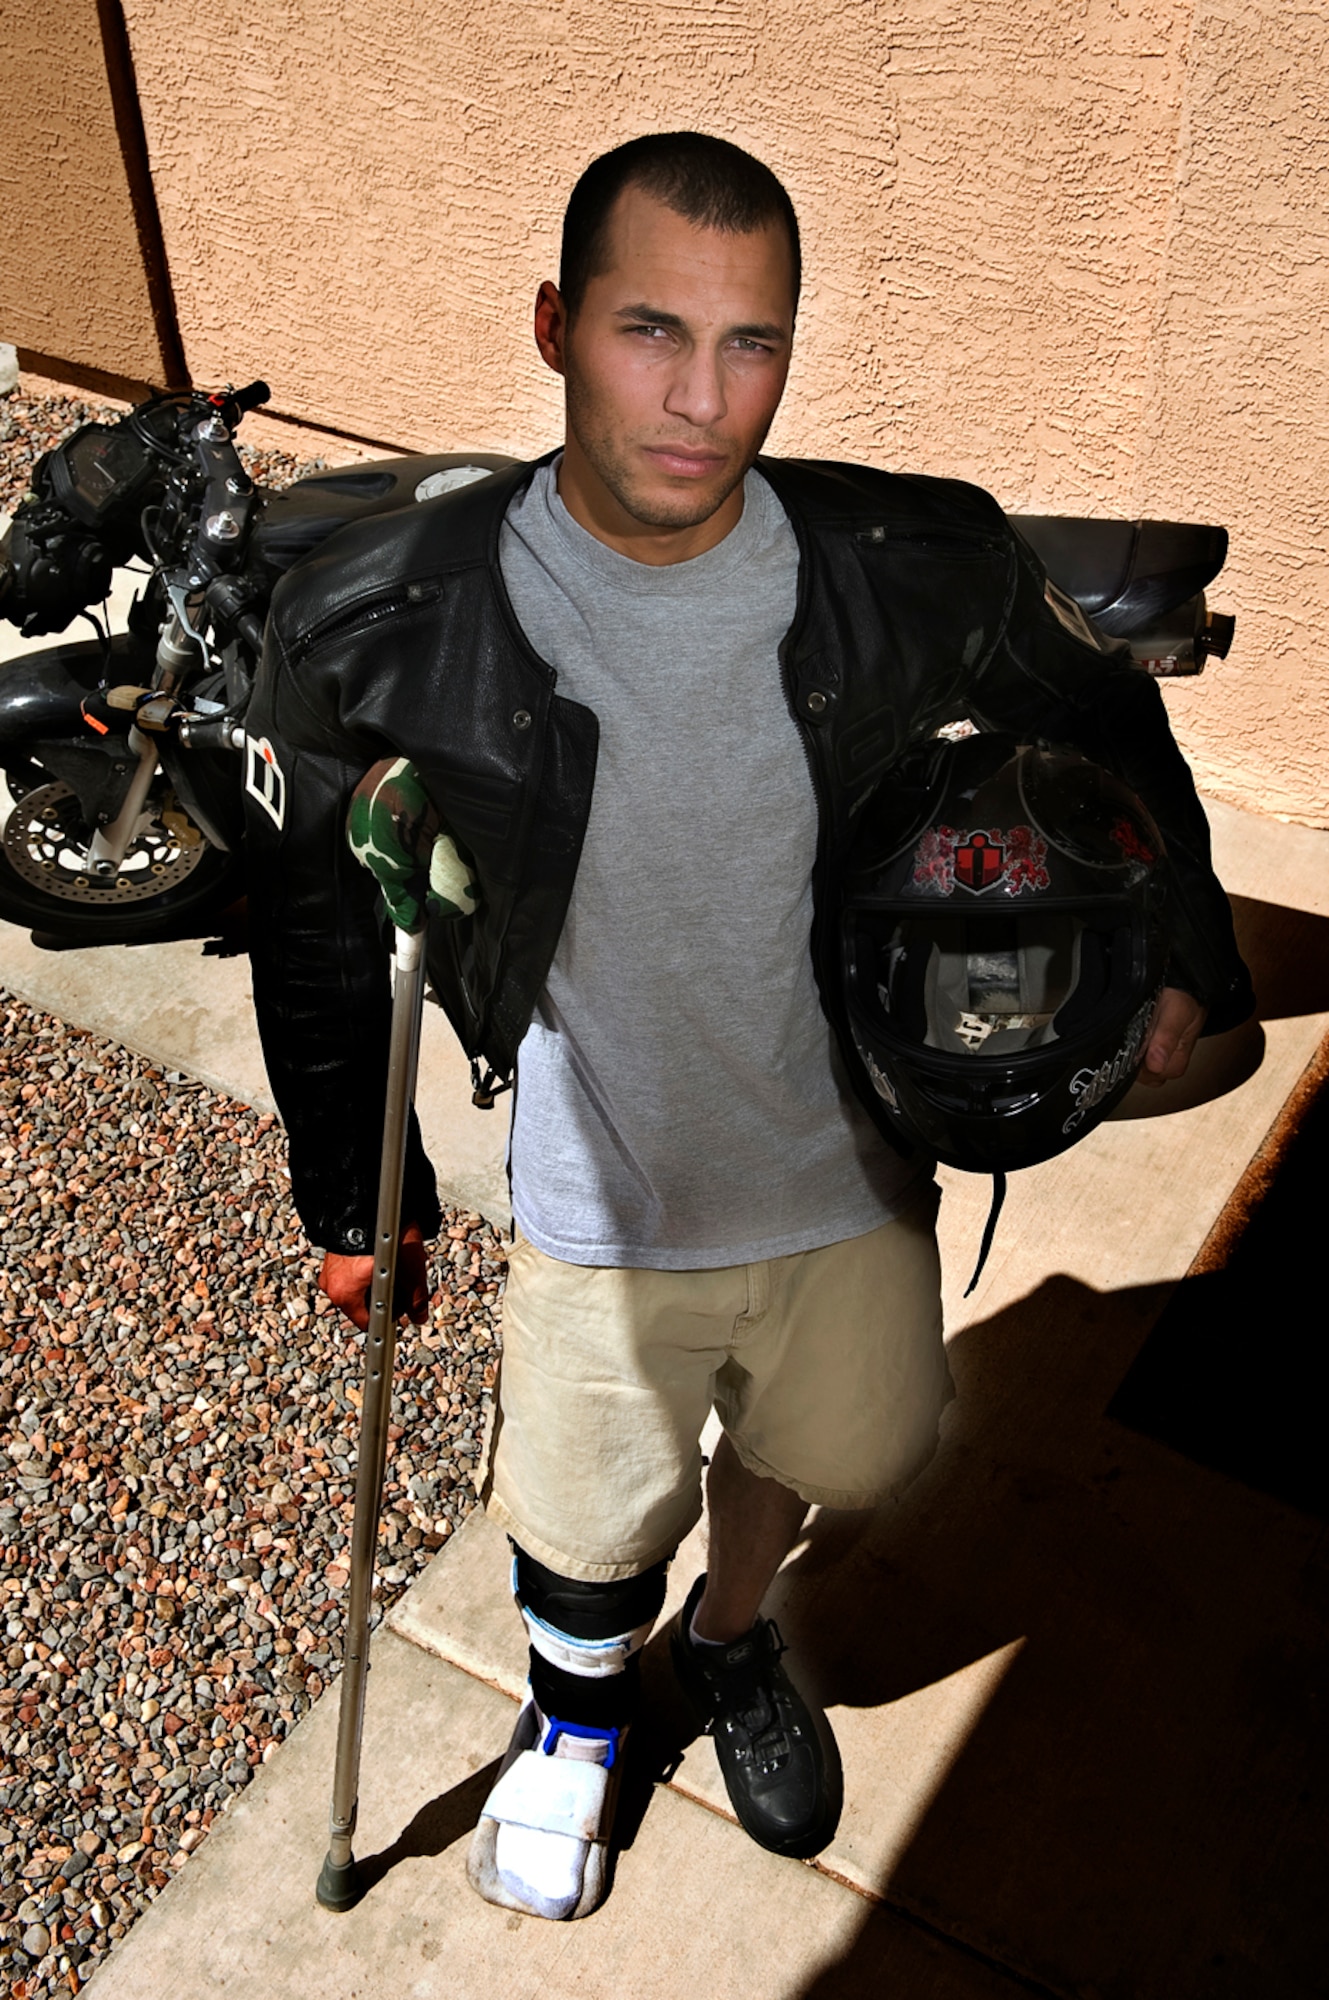 After blowing out a tire, Senior Airman Trevor Adams of Kirtland AFB, N.M., lost control of his motorcycle while going 70 mph. He crashed and then was run over by two vehicles, resulting in torn ligaments in his right knee, nerve damage to his foot and some road rash. He credits the minimal injuries to his protective gear. (photo by Tech. Sgt. Matthew Hannen)